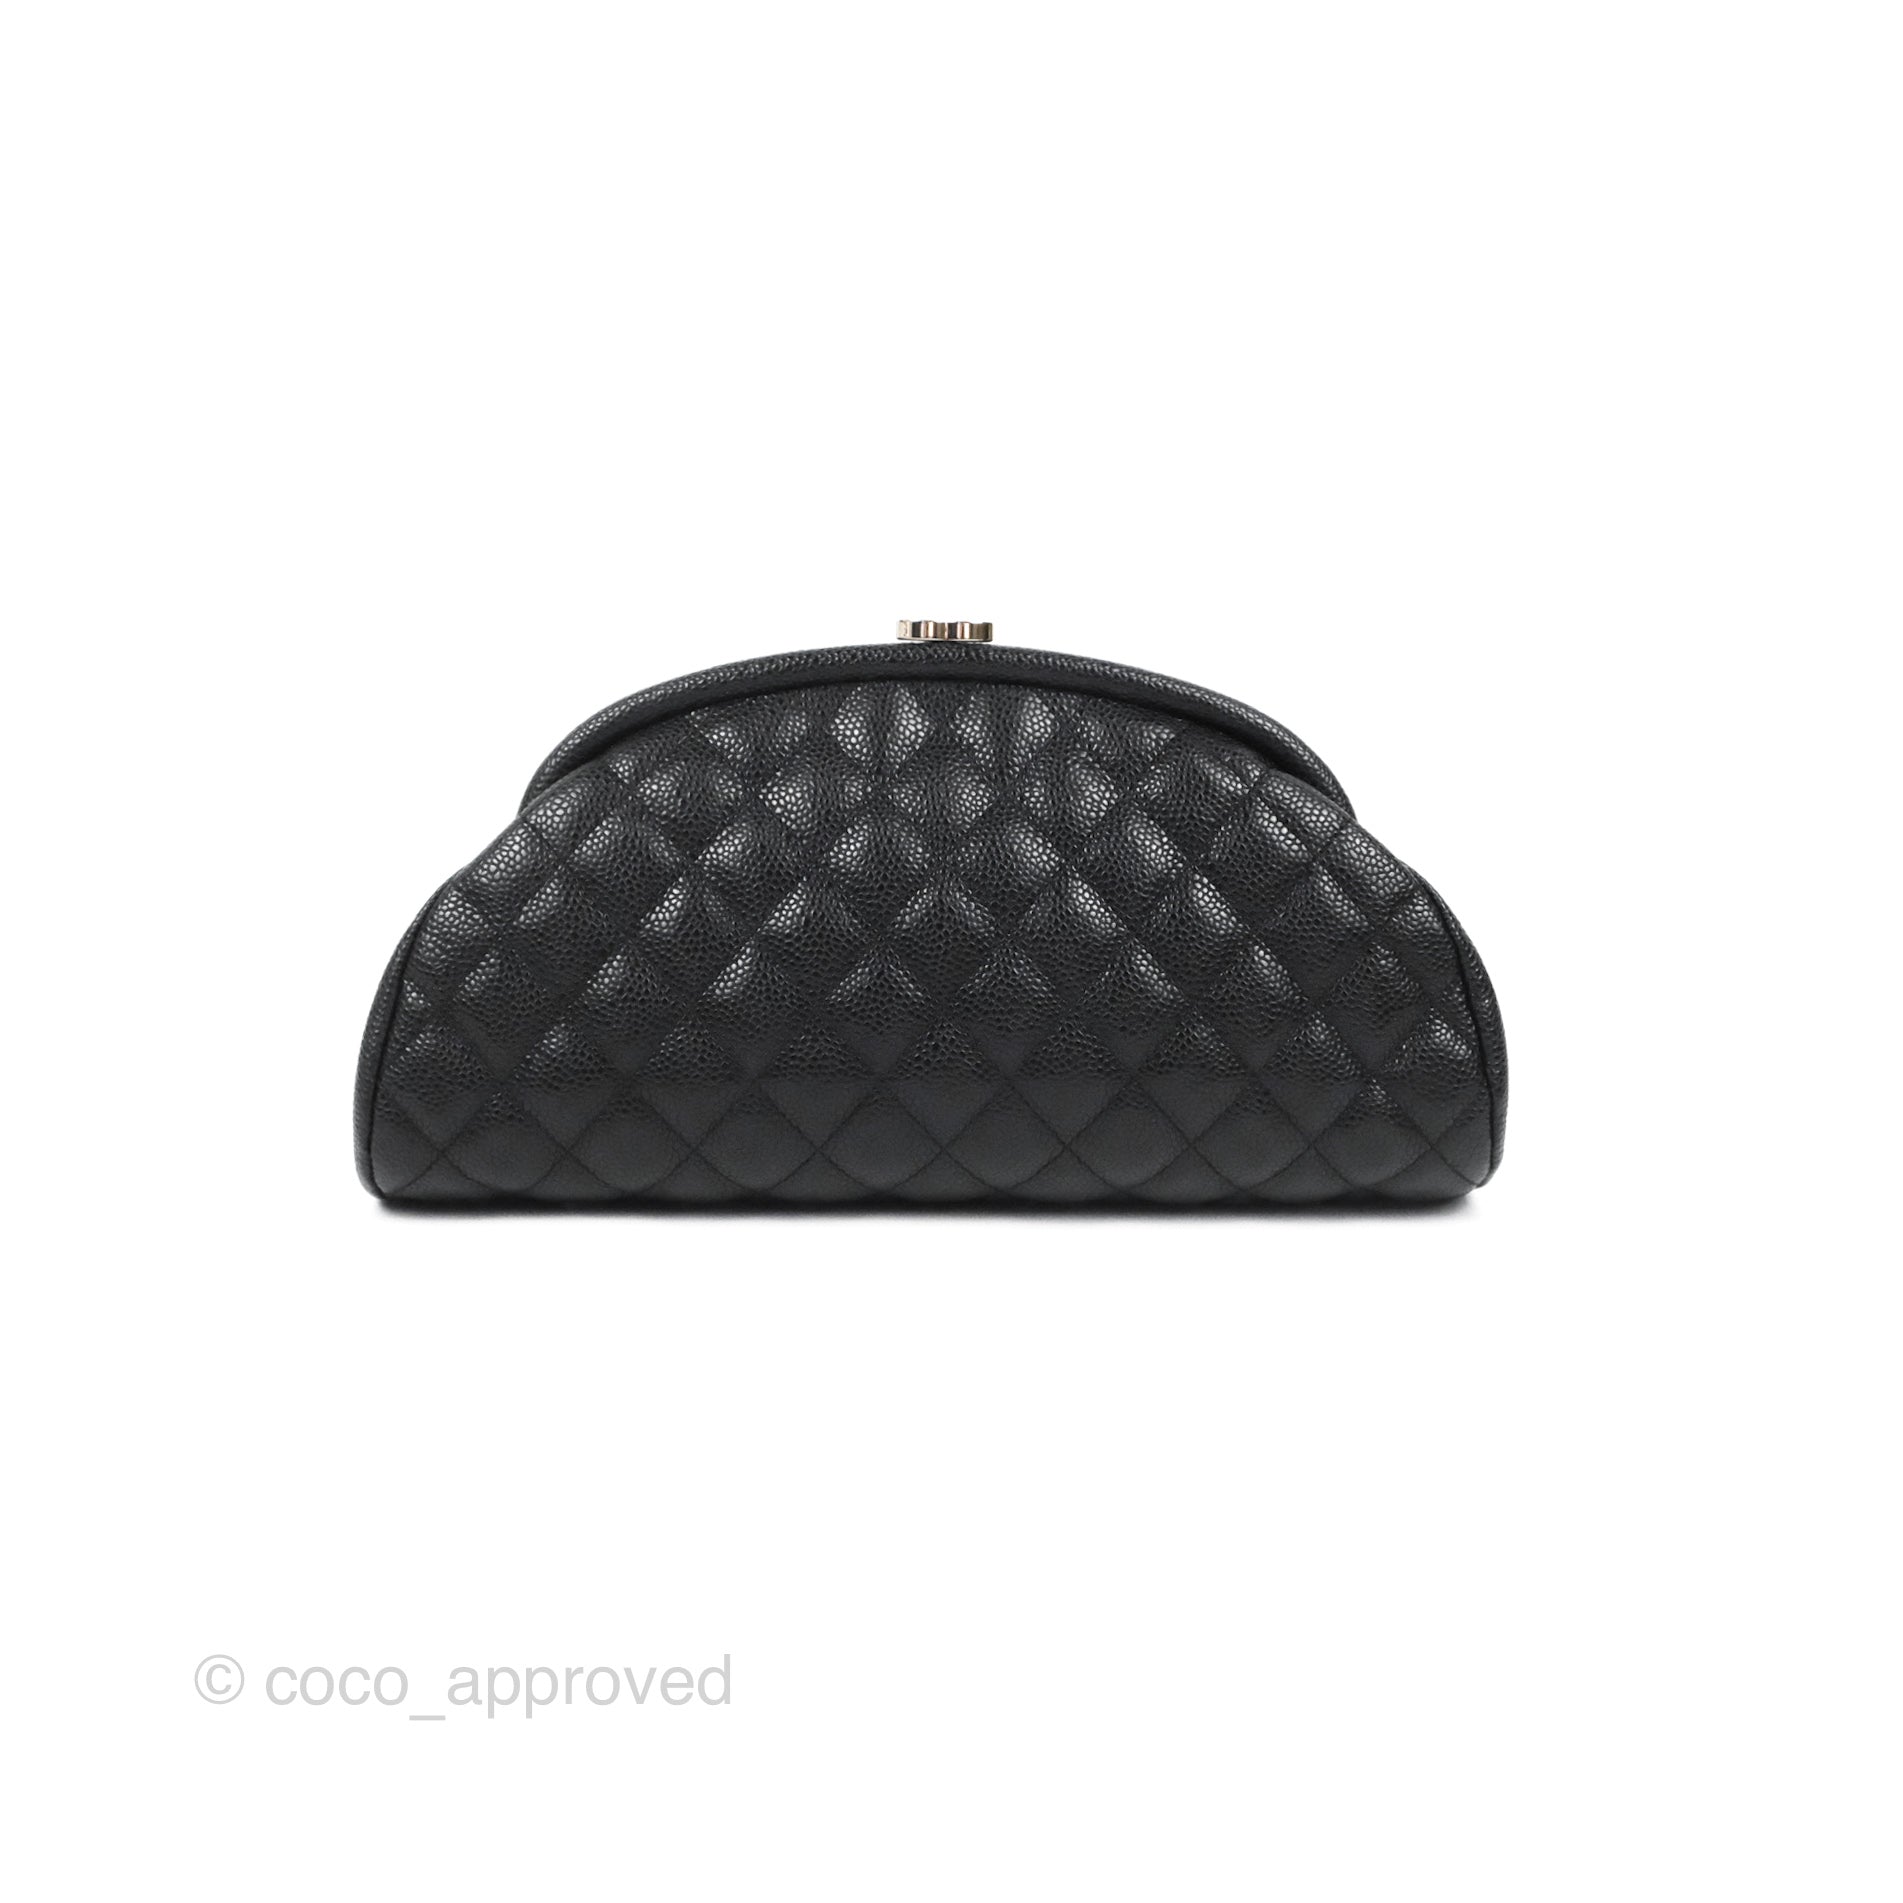 Sold at Auction: CHANEL GOLD QUILTED LEATHER CONVERTIBLE CLUTCH BAG